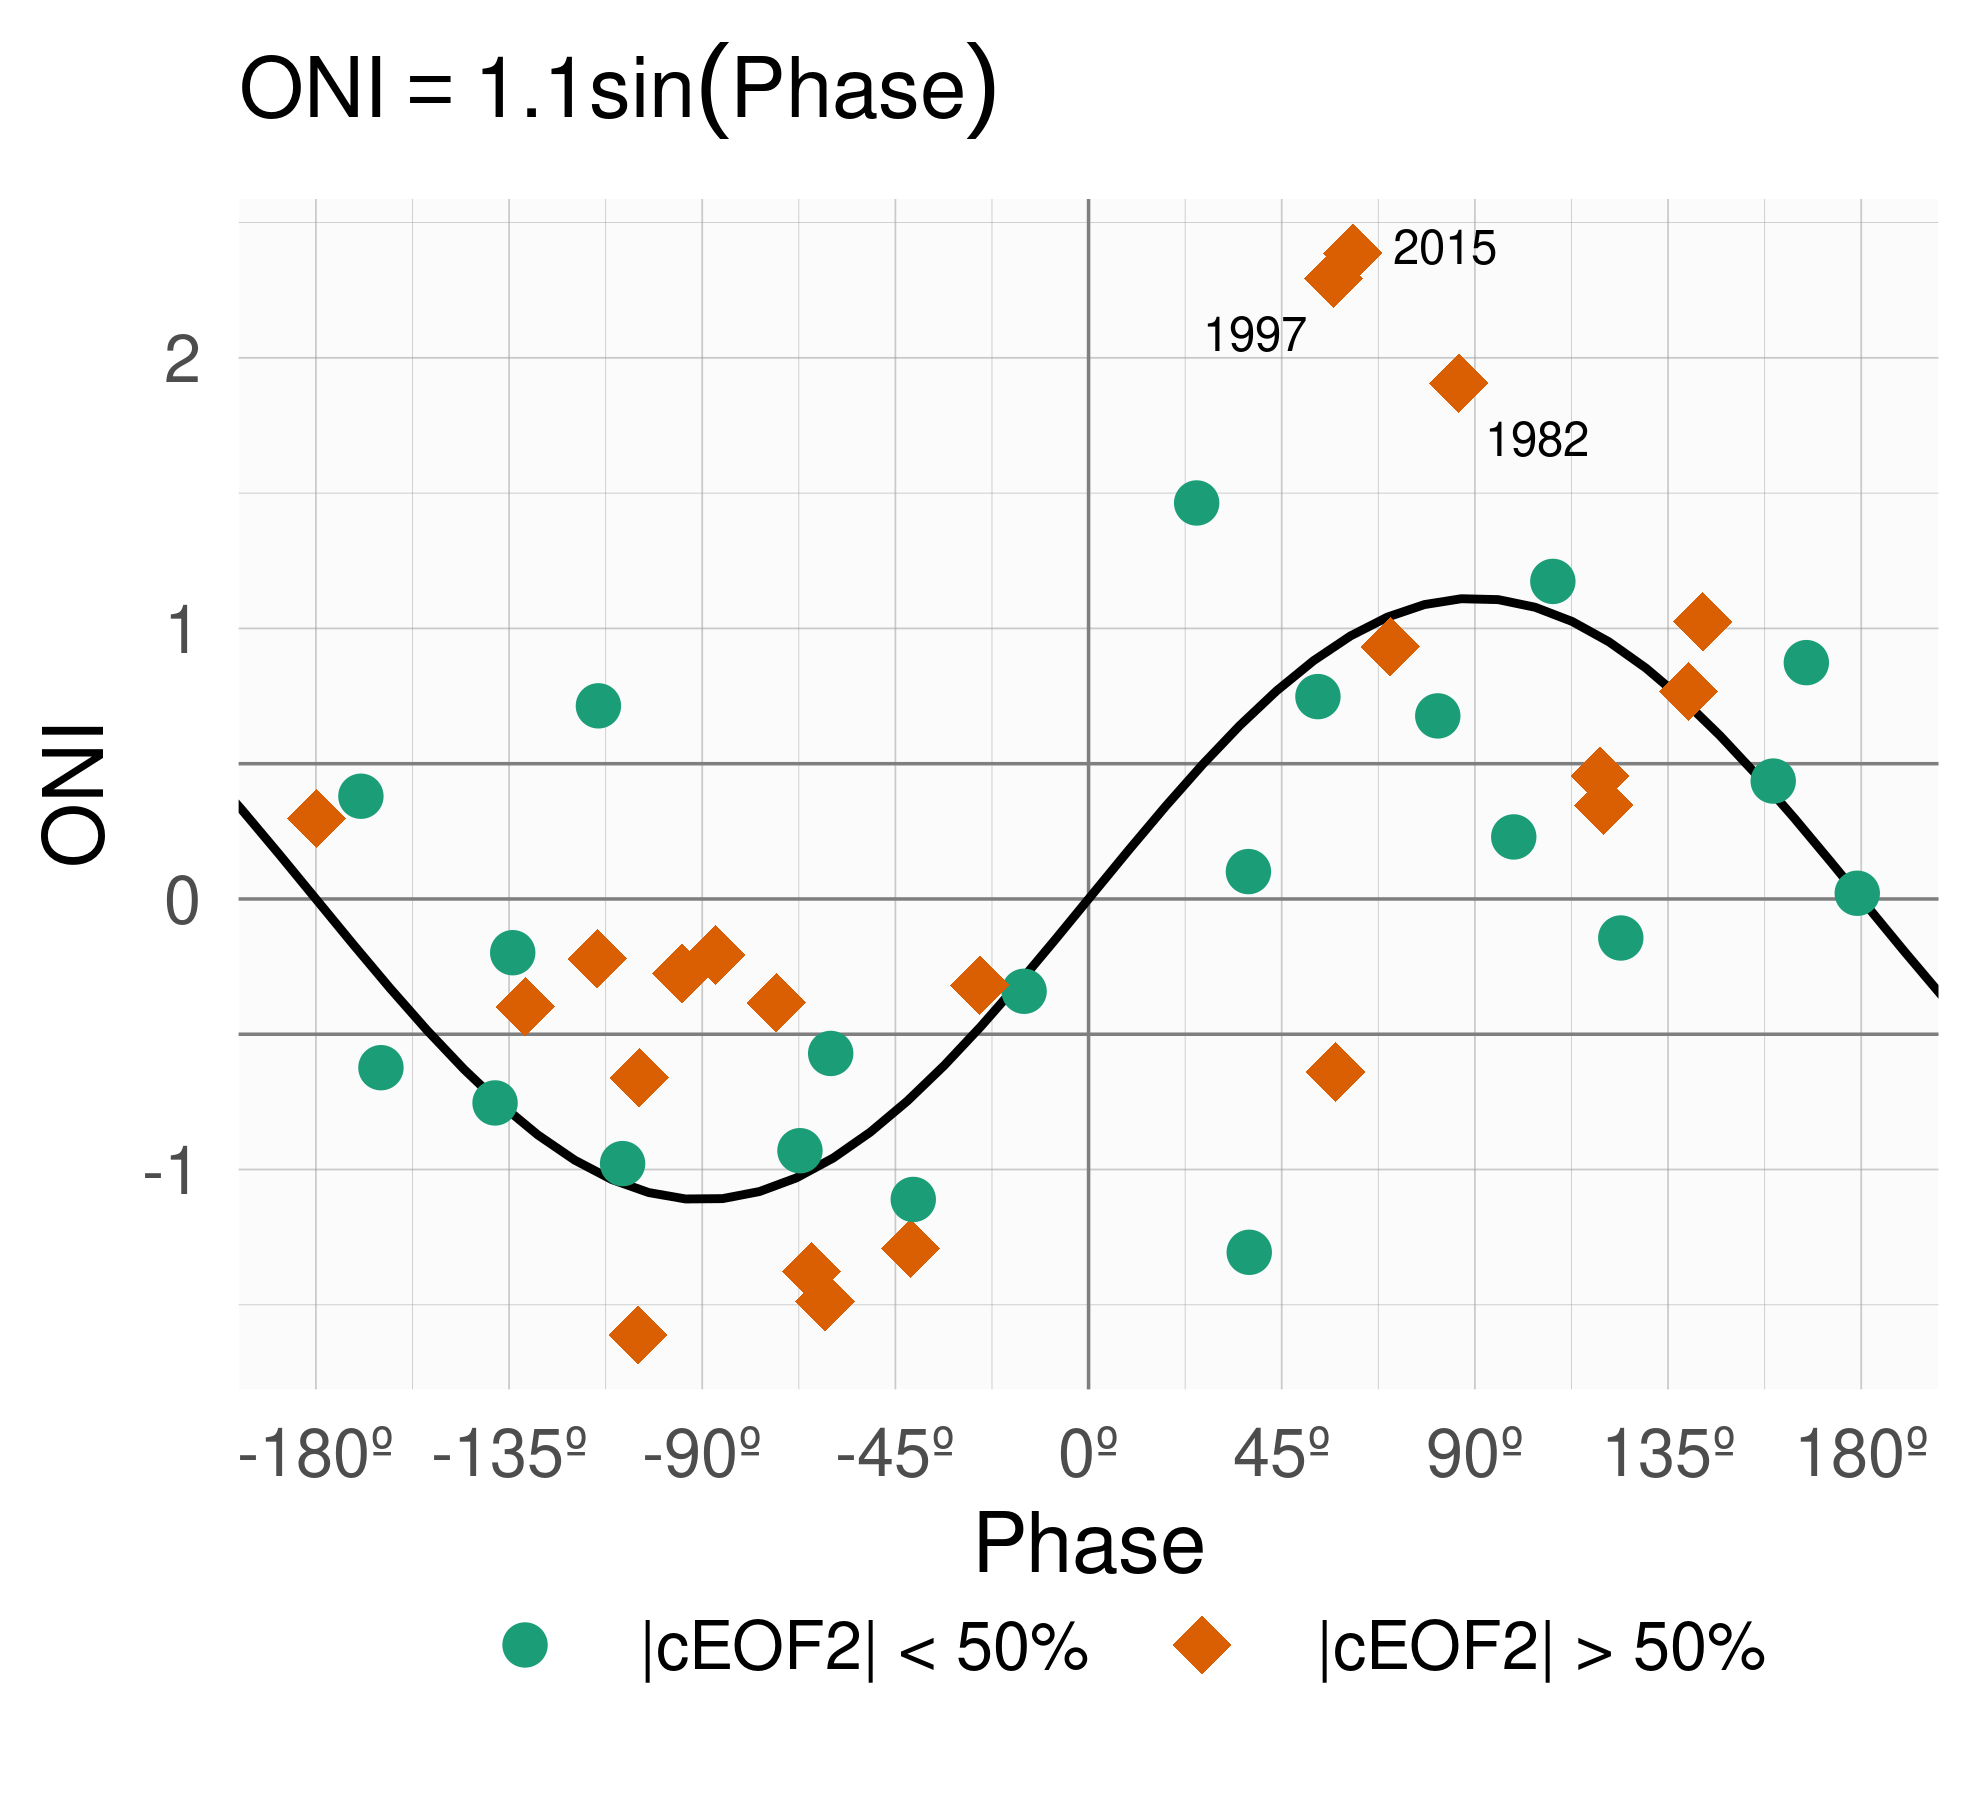 SON ONI values plotted against cEOF2 phase for the 1979 – 2019 period. Years with magnitude of cEOF2 greater (smaller) than the 50th percentile are shown as orange diamonds (green circles). Black line is the fit ONI ~ sin(phase) computed by weighted OLS using the magnitude of the cEOF2 as weights.